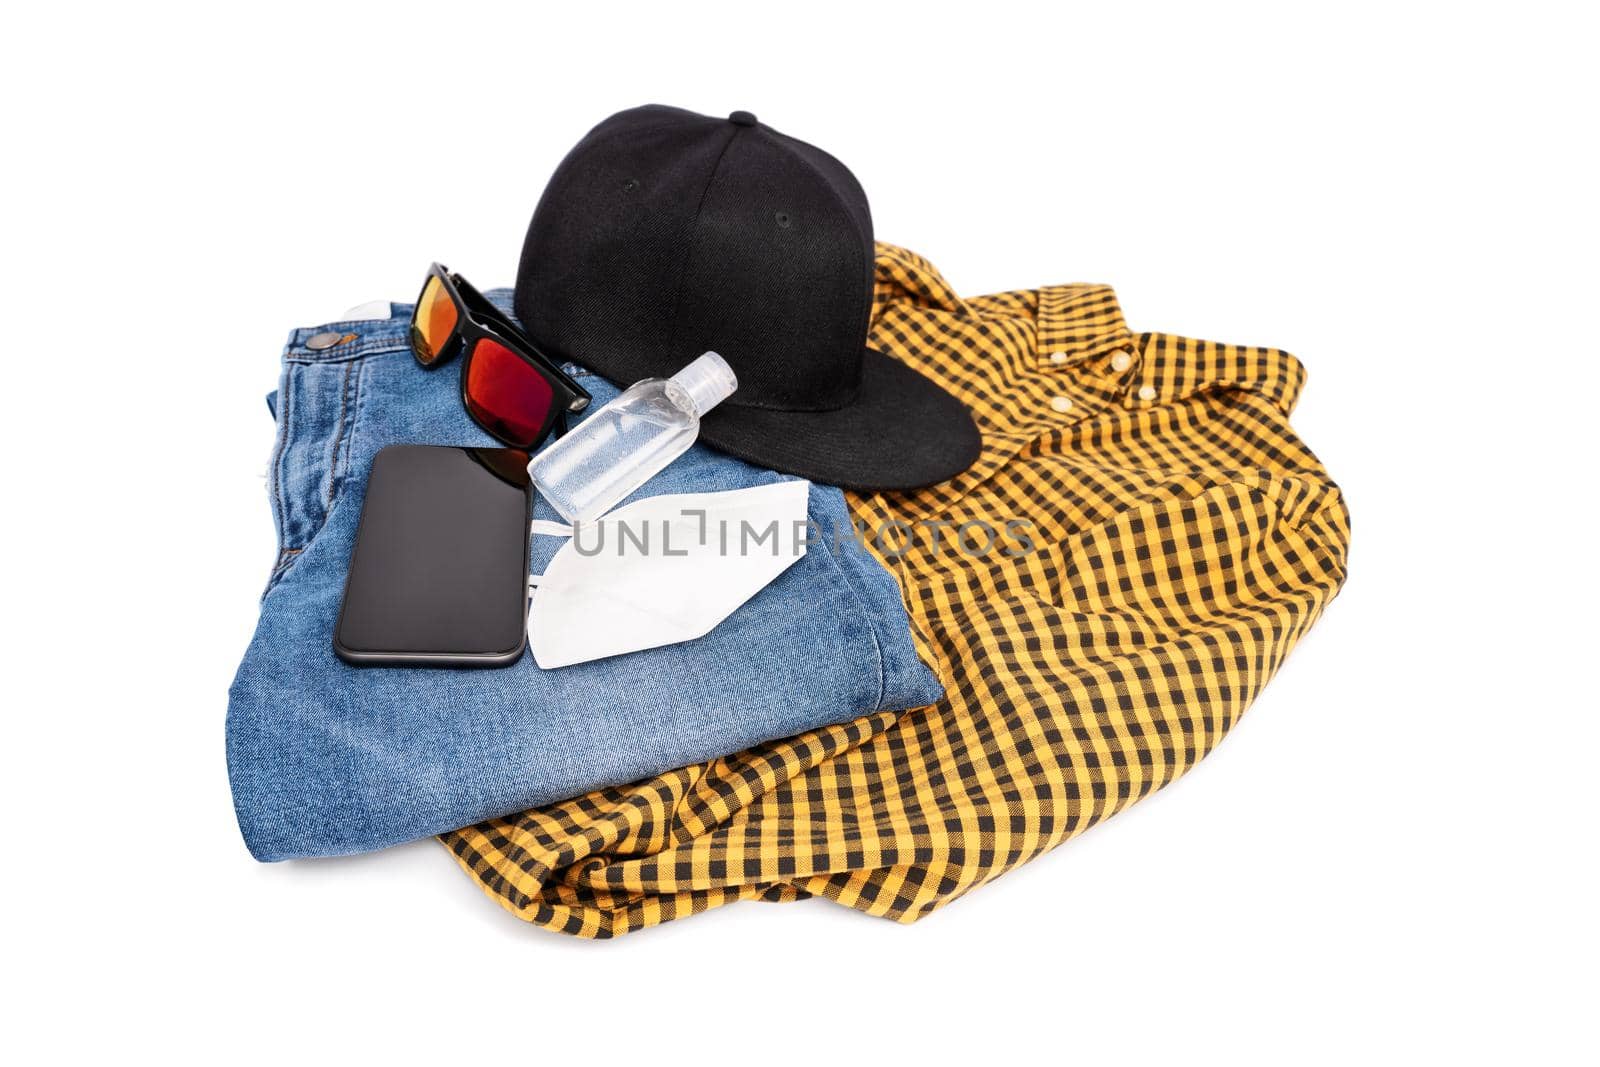 Modern stylish male outfit for the pandemic outing by Mendelex